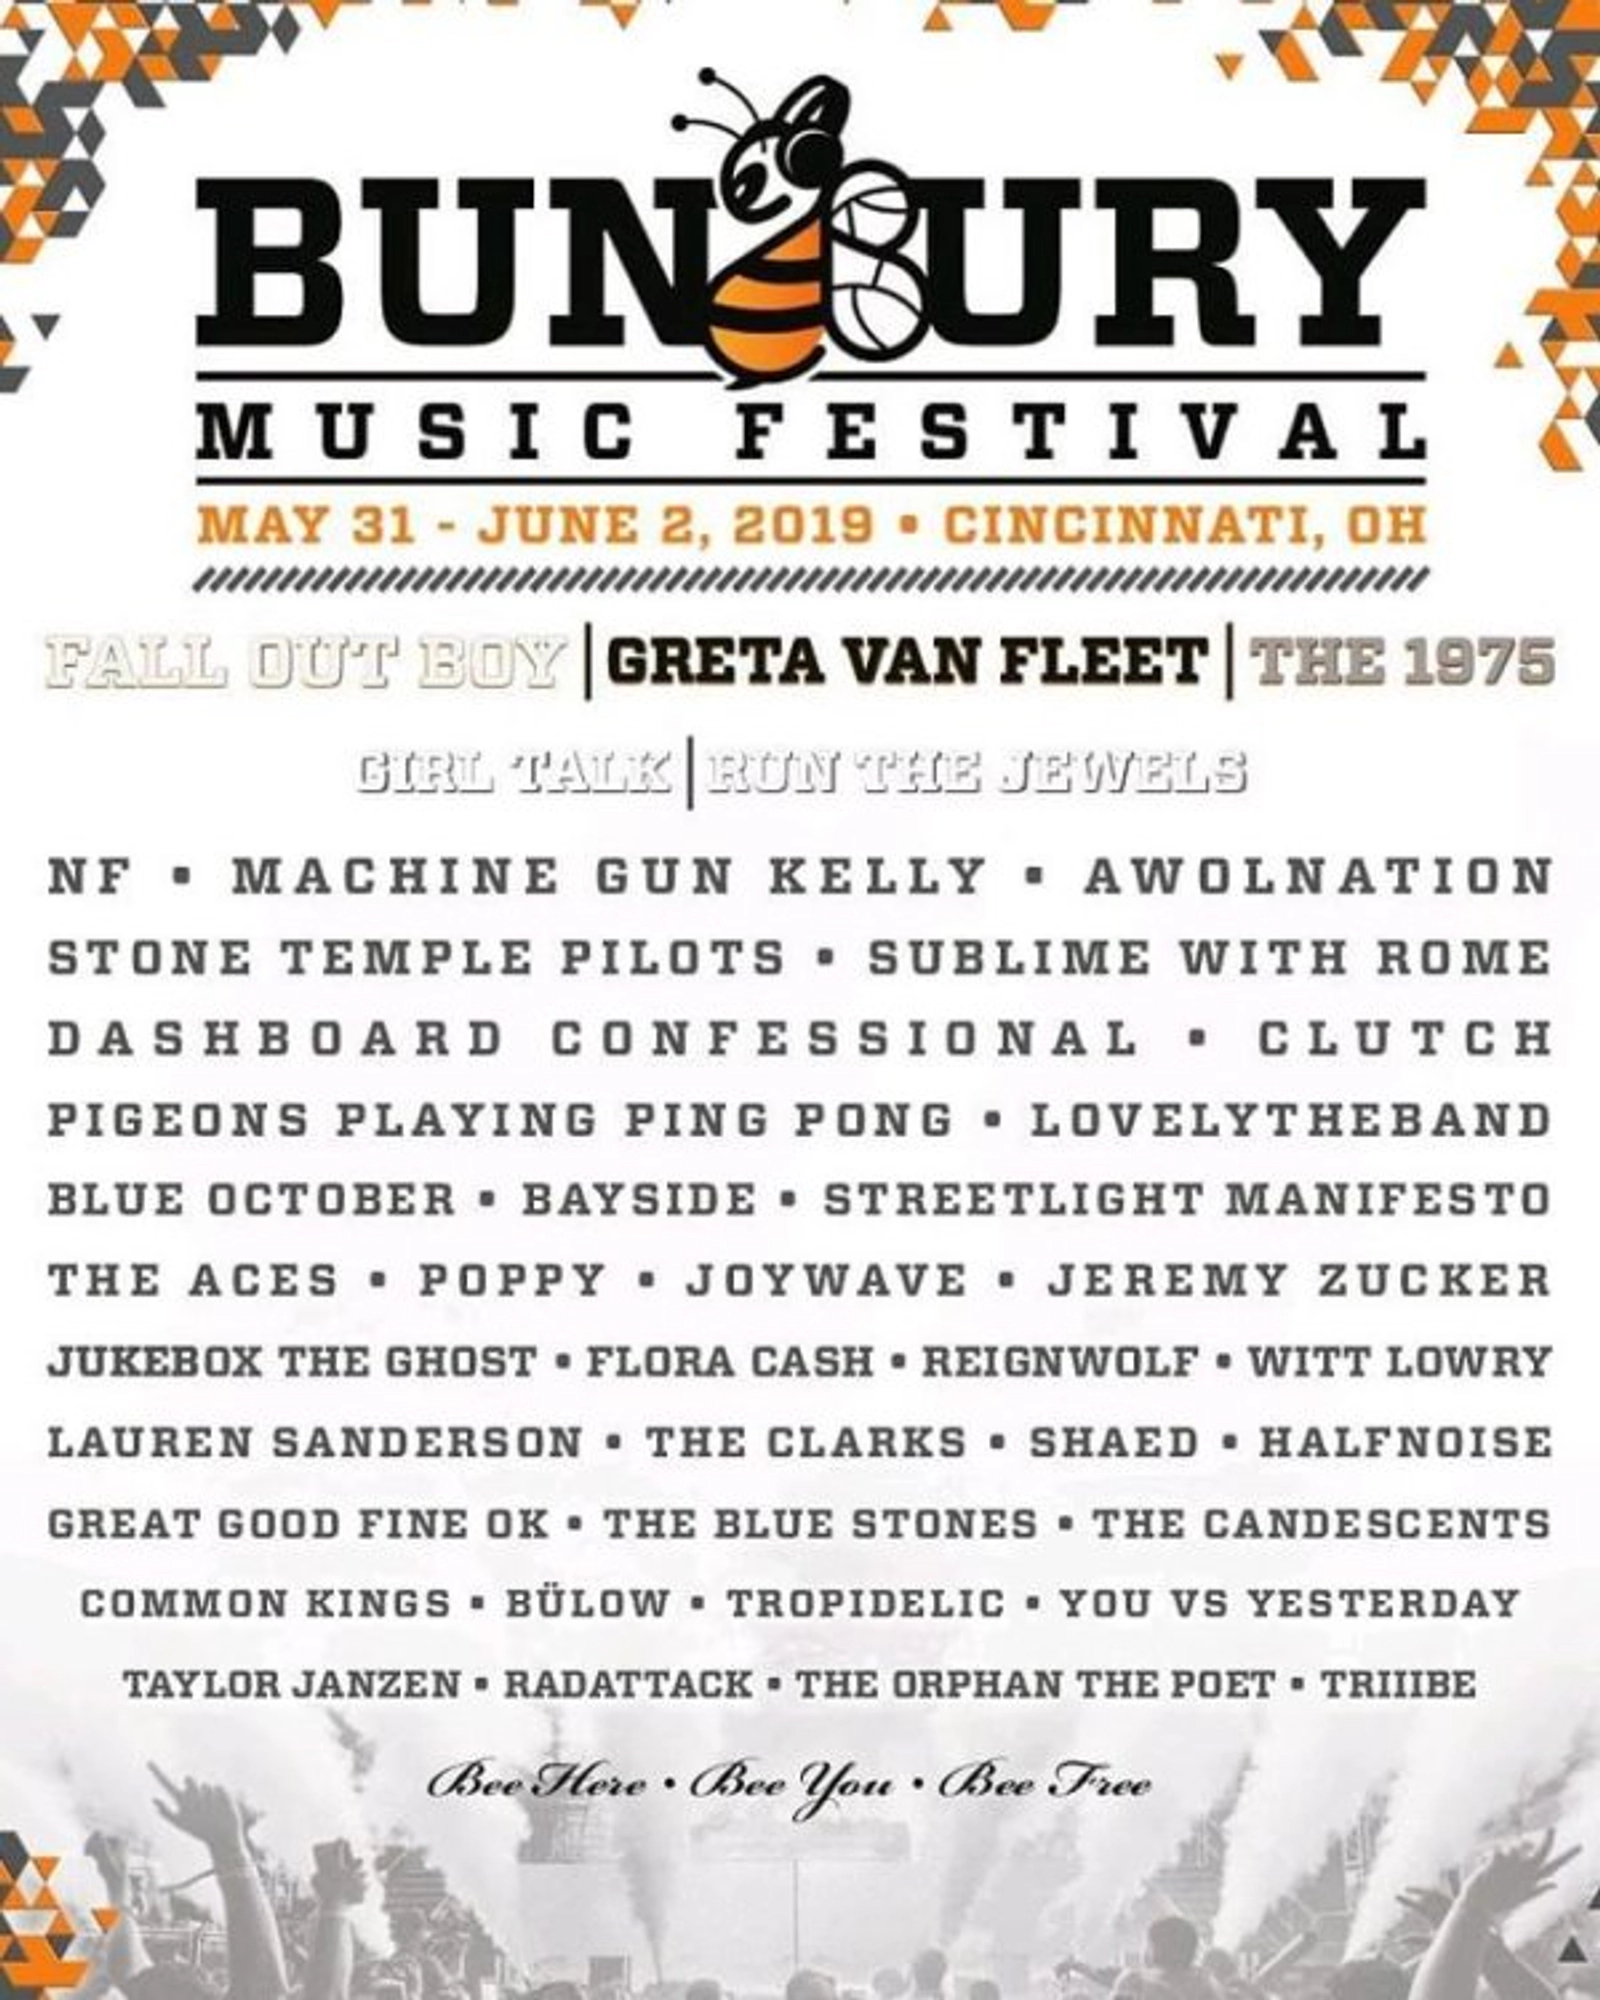 Win 3-Day Weekend Passes to the 2019 Bunbury Music Festival! - Thumbnail Image